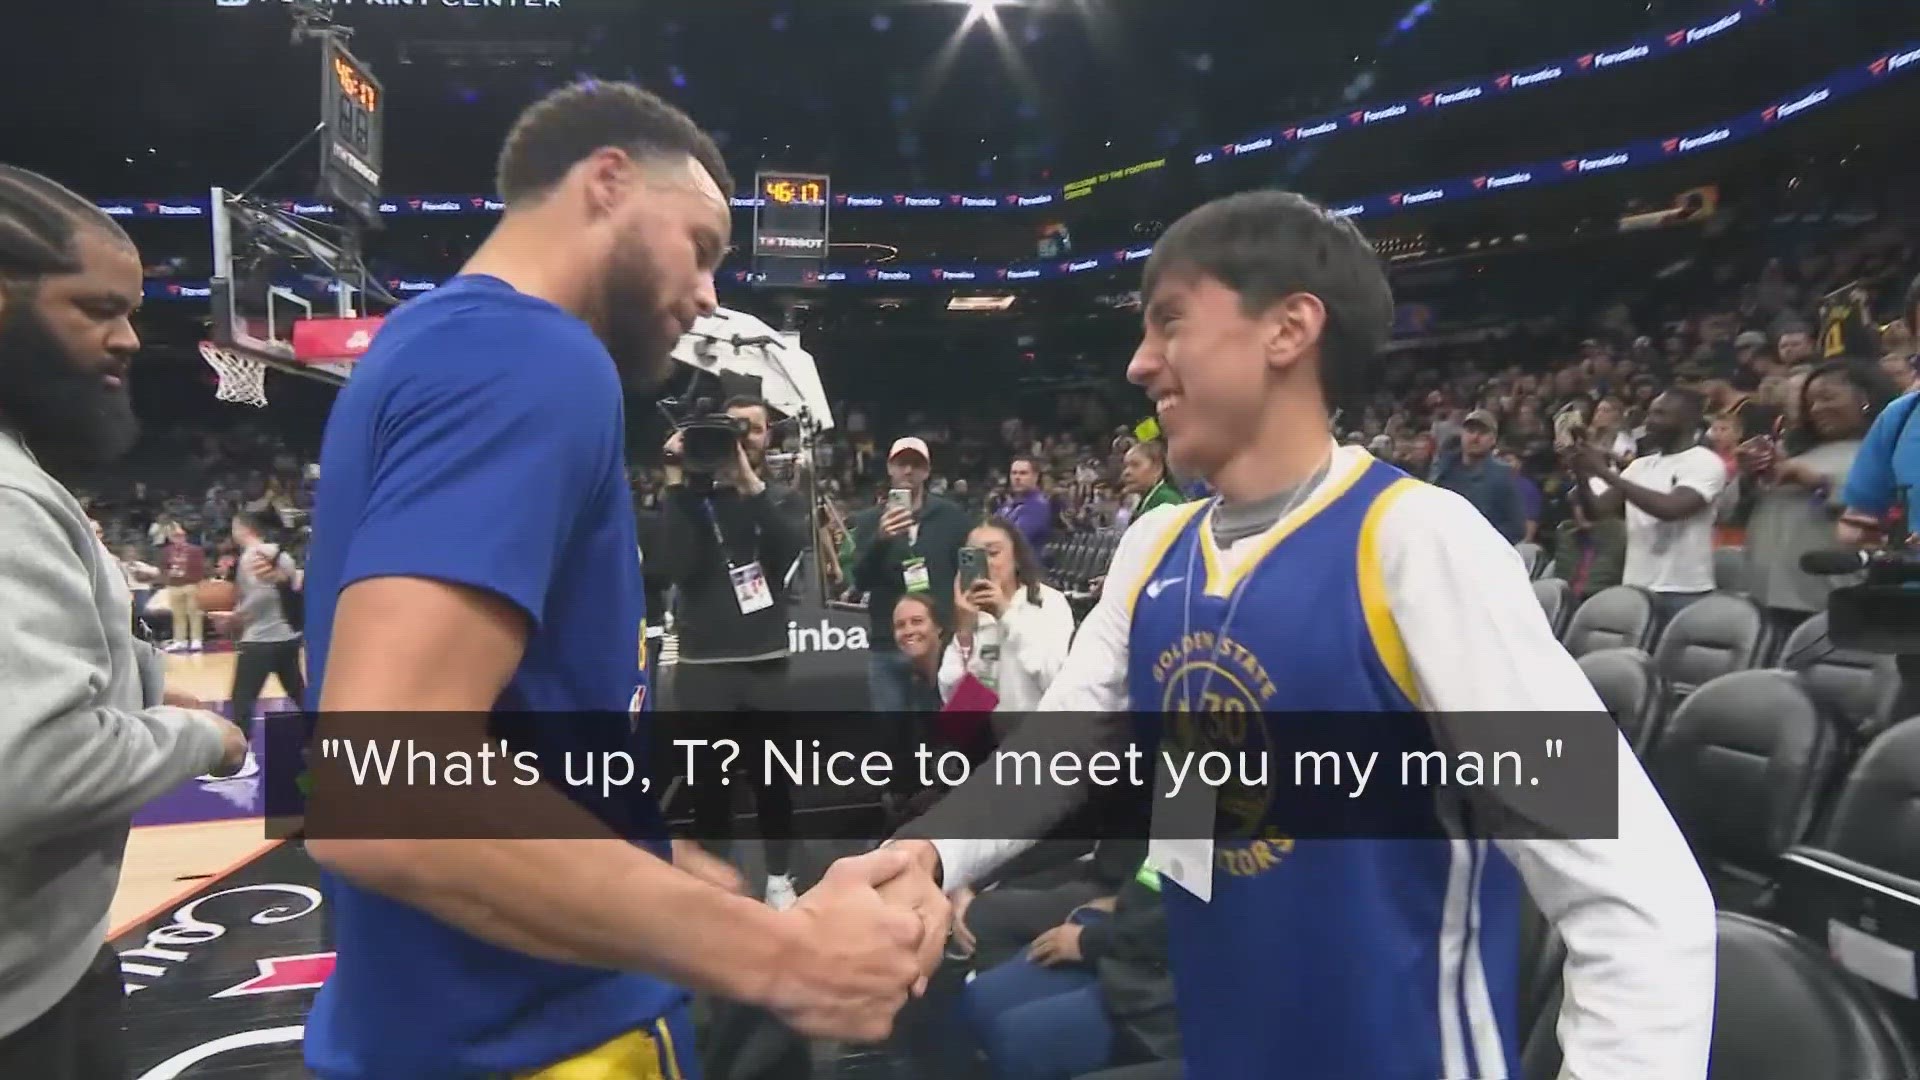 On Tuesday night, T Ramirez got the opportunity to meet his favorite basketball player Steph Curry.